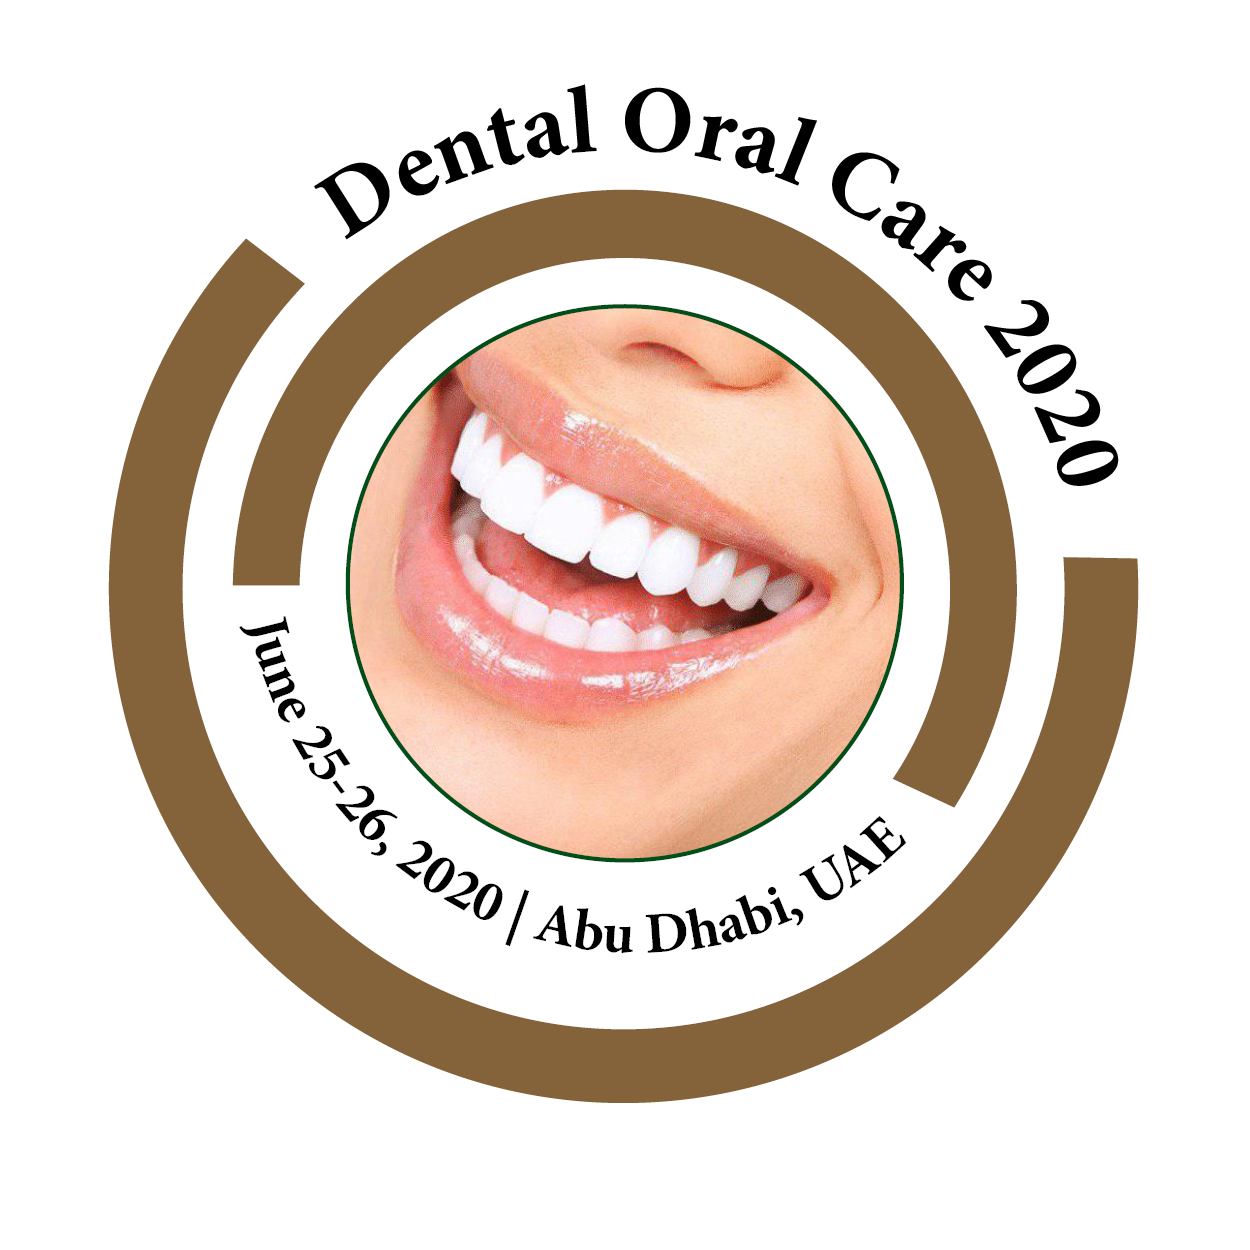 3rd Annual Conference on  Oral Care and Dentistry, Abu Dhabi, United Arab Emirates